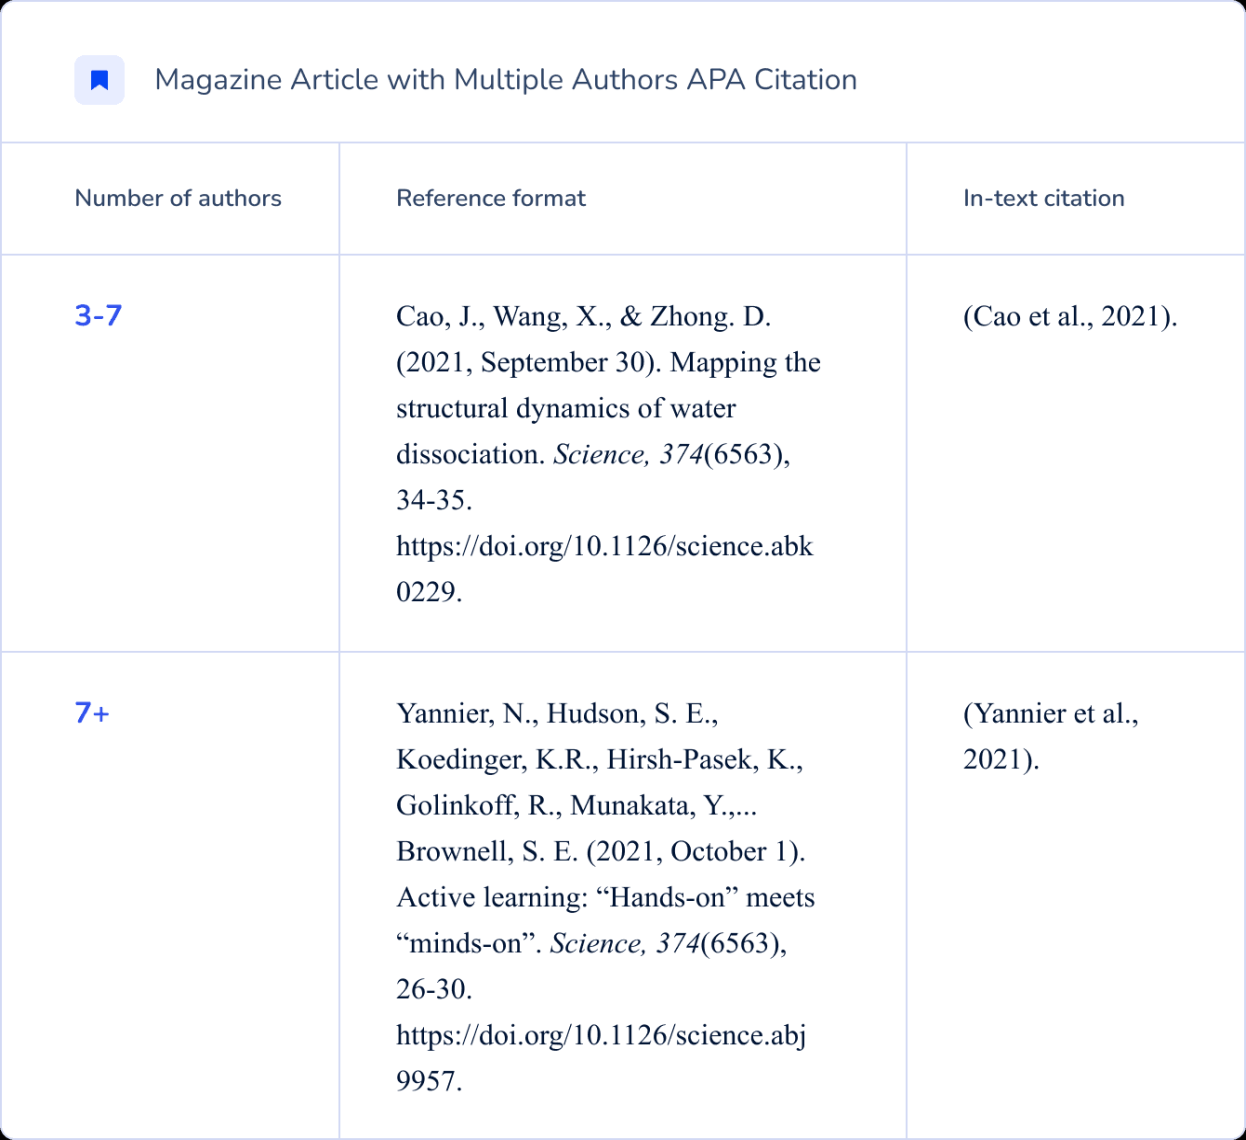 How to Cite a Magazine Article in APA: Citation Guide